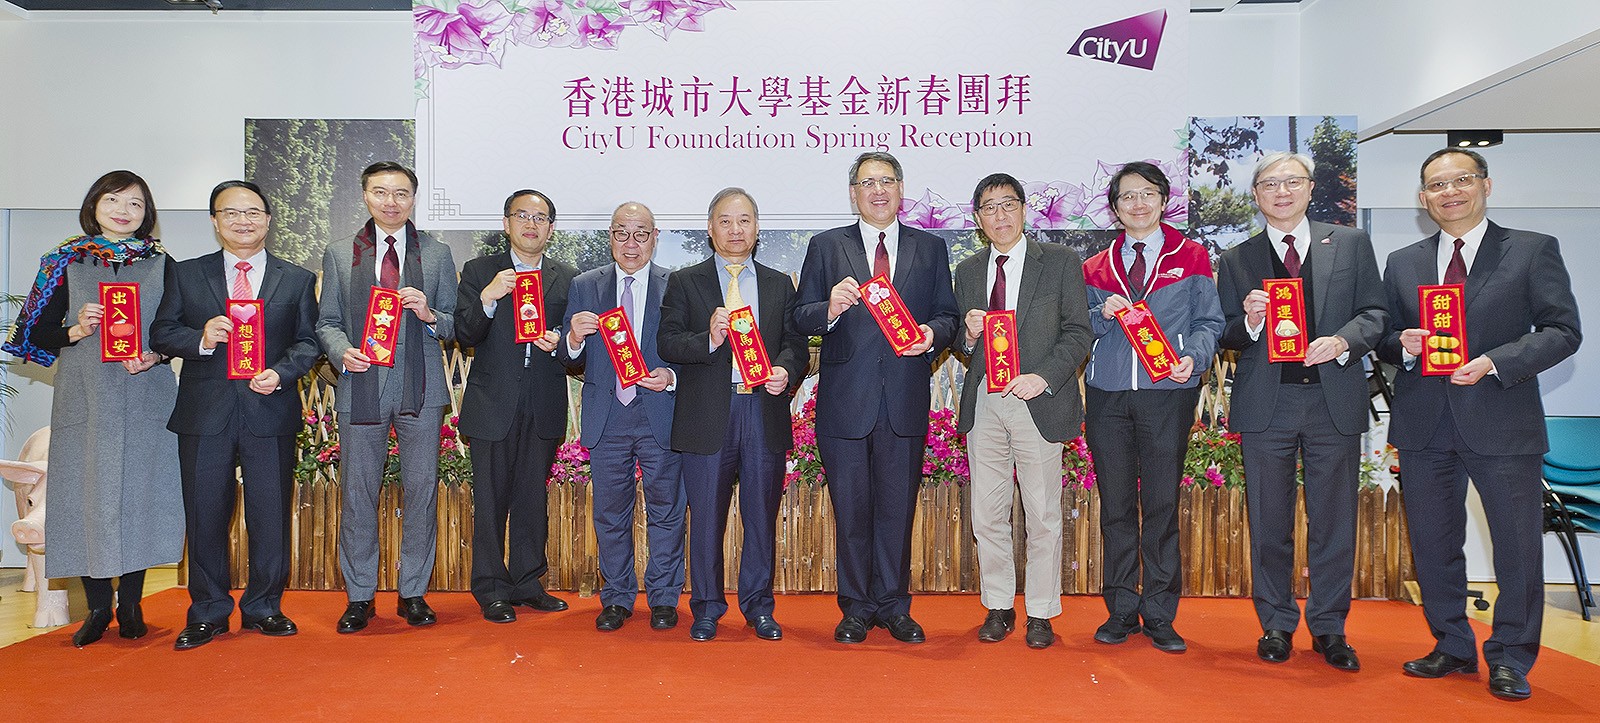 Mr Huang (5th from right), Professor Kuo (4th from right), members of CityU Foundation Board of Governors, members of CityU Council and representatives of CityU’s senior management extend their best wishes to guests.